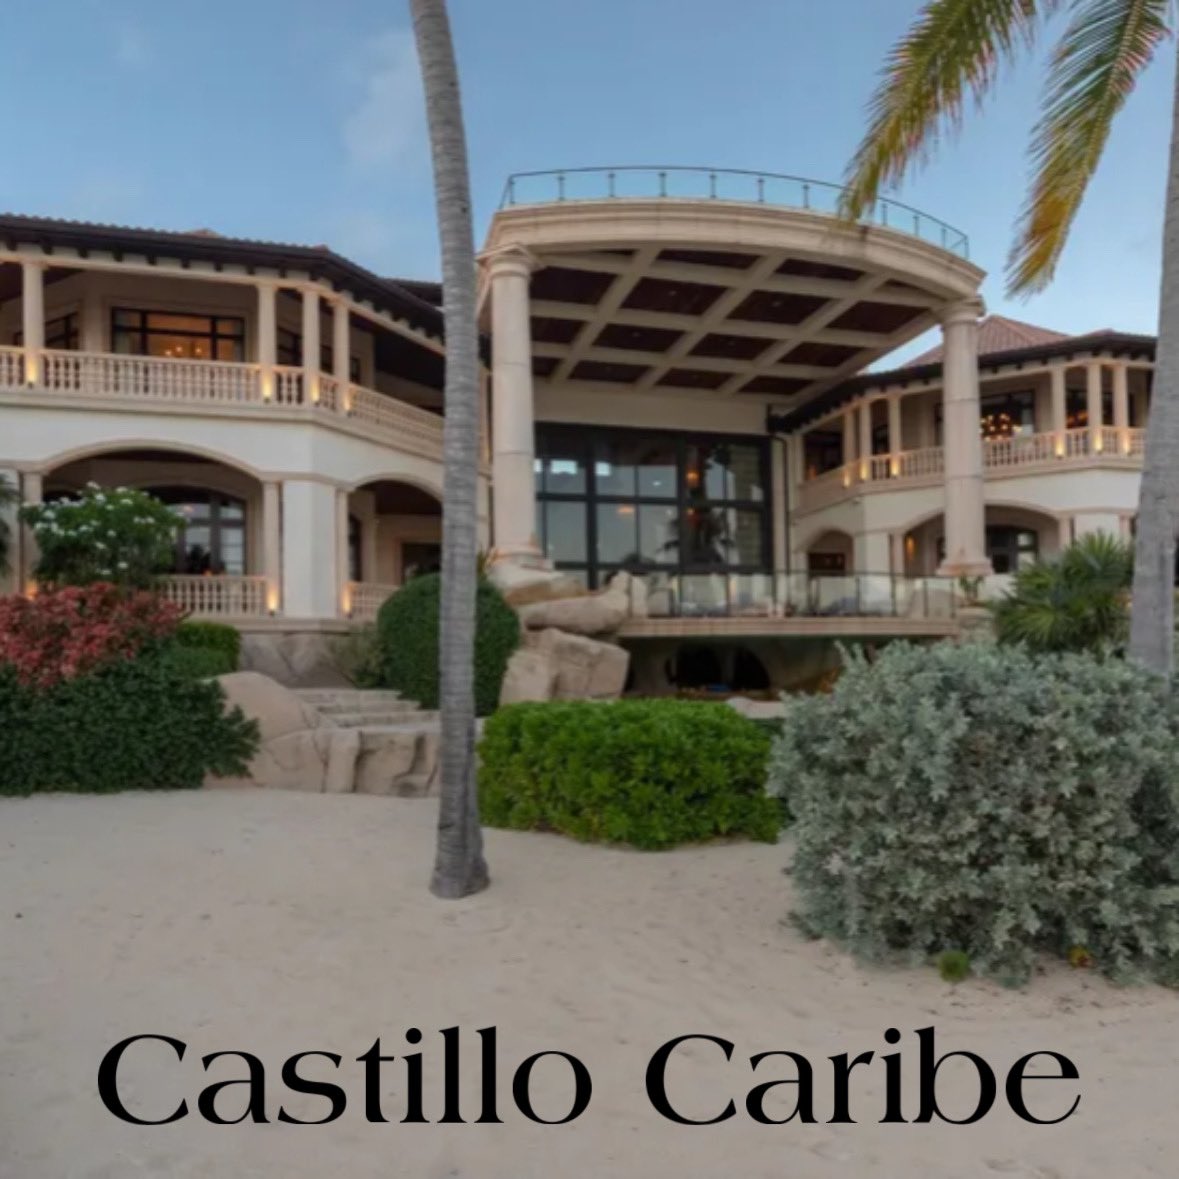 Castillo Caribe

one of the finest beachfront estate homes in the world with all the lifestyle options one would expect from the Cayman Islands

Member of CIREBA 
MLS # 402170

#Luxury #Caribbean #Cayman 
#CaymanRealEstate #caymansothebysrealty #caymanislandsrealestate